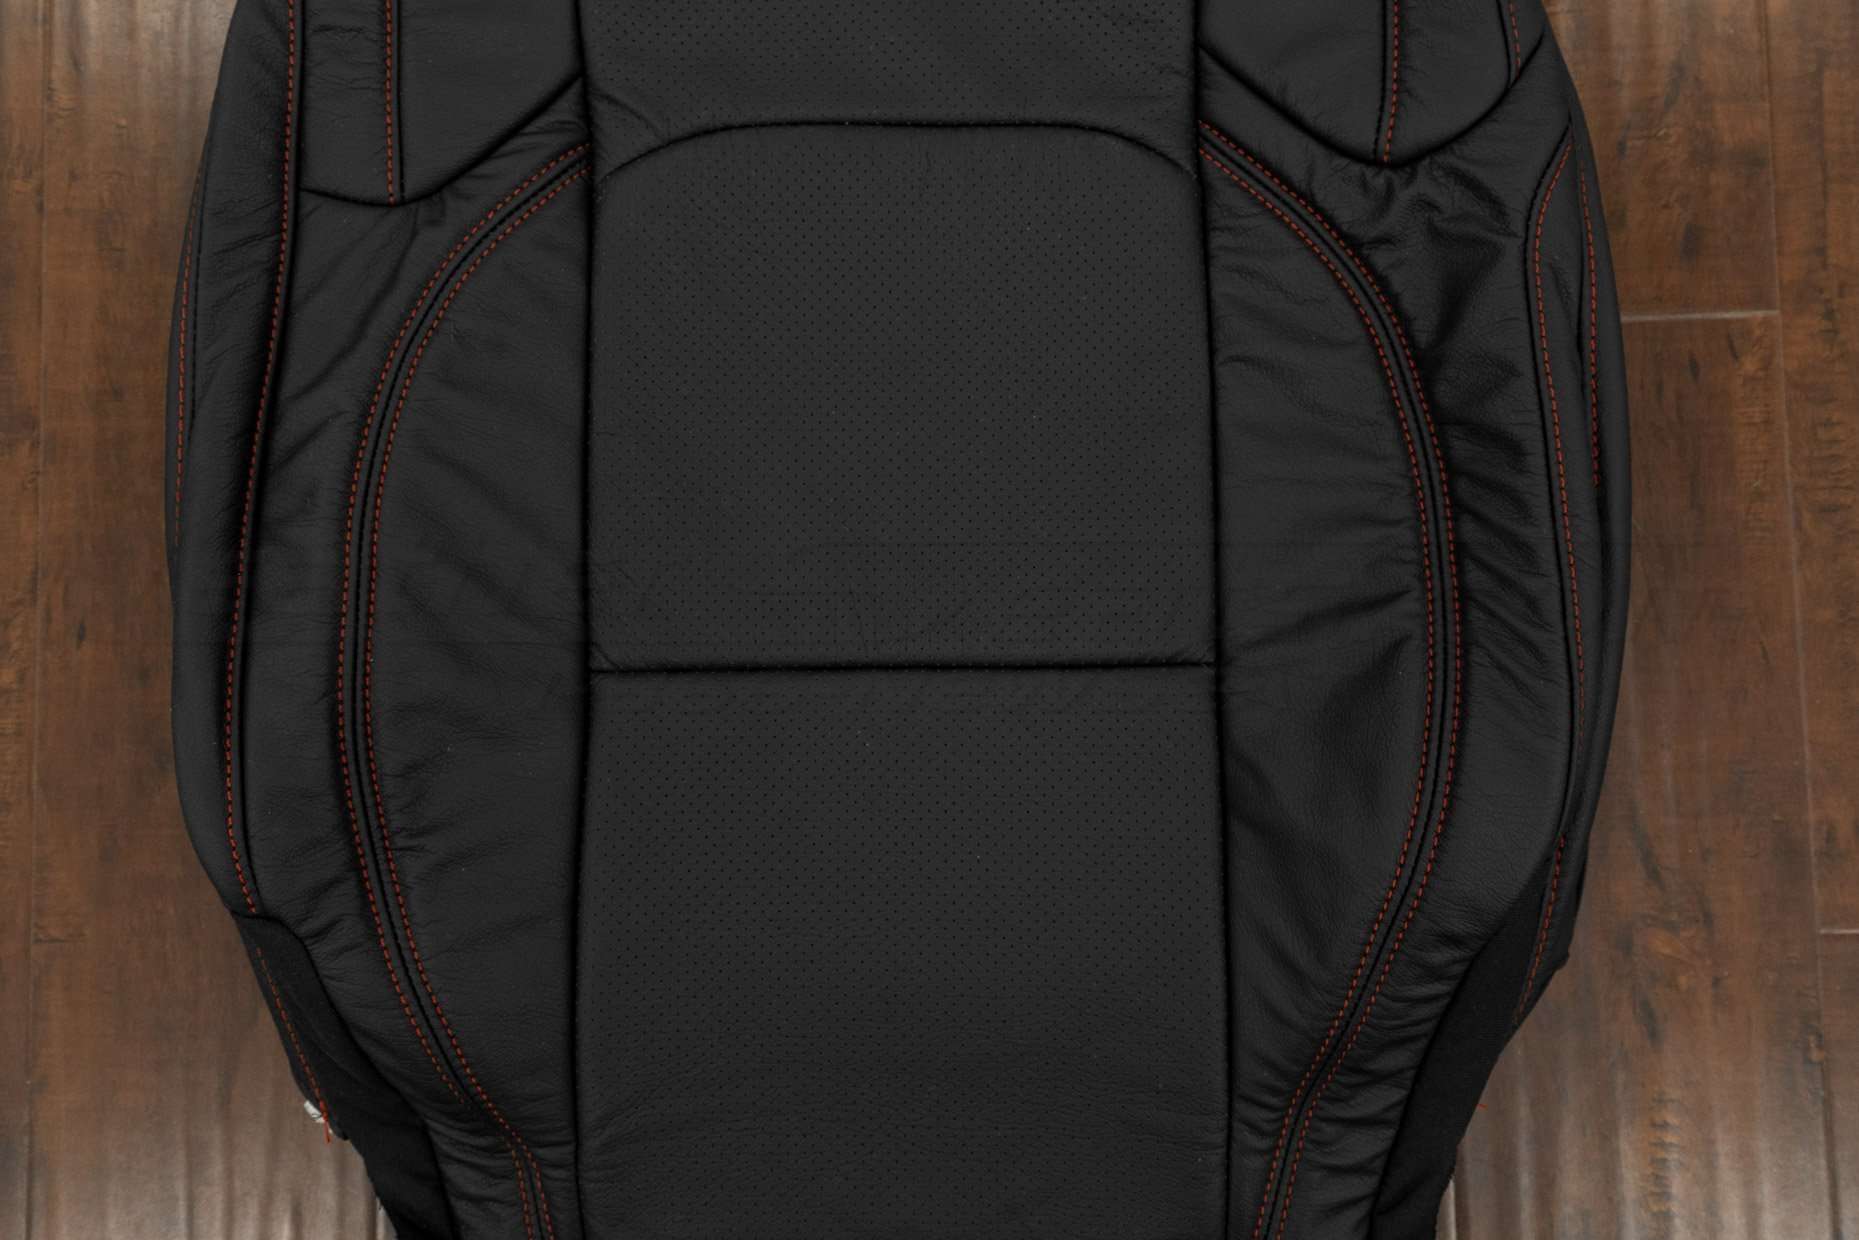 Perofrated Body section of backrest